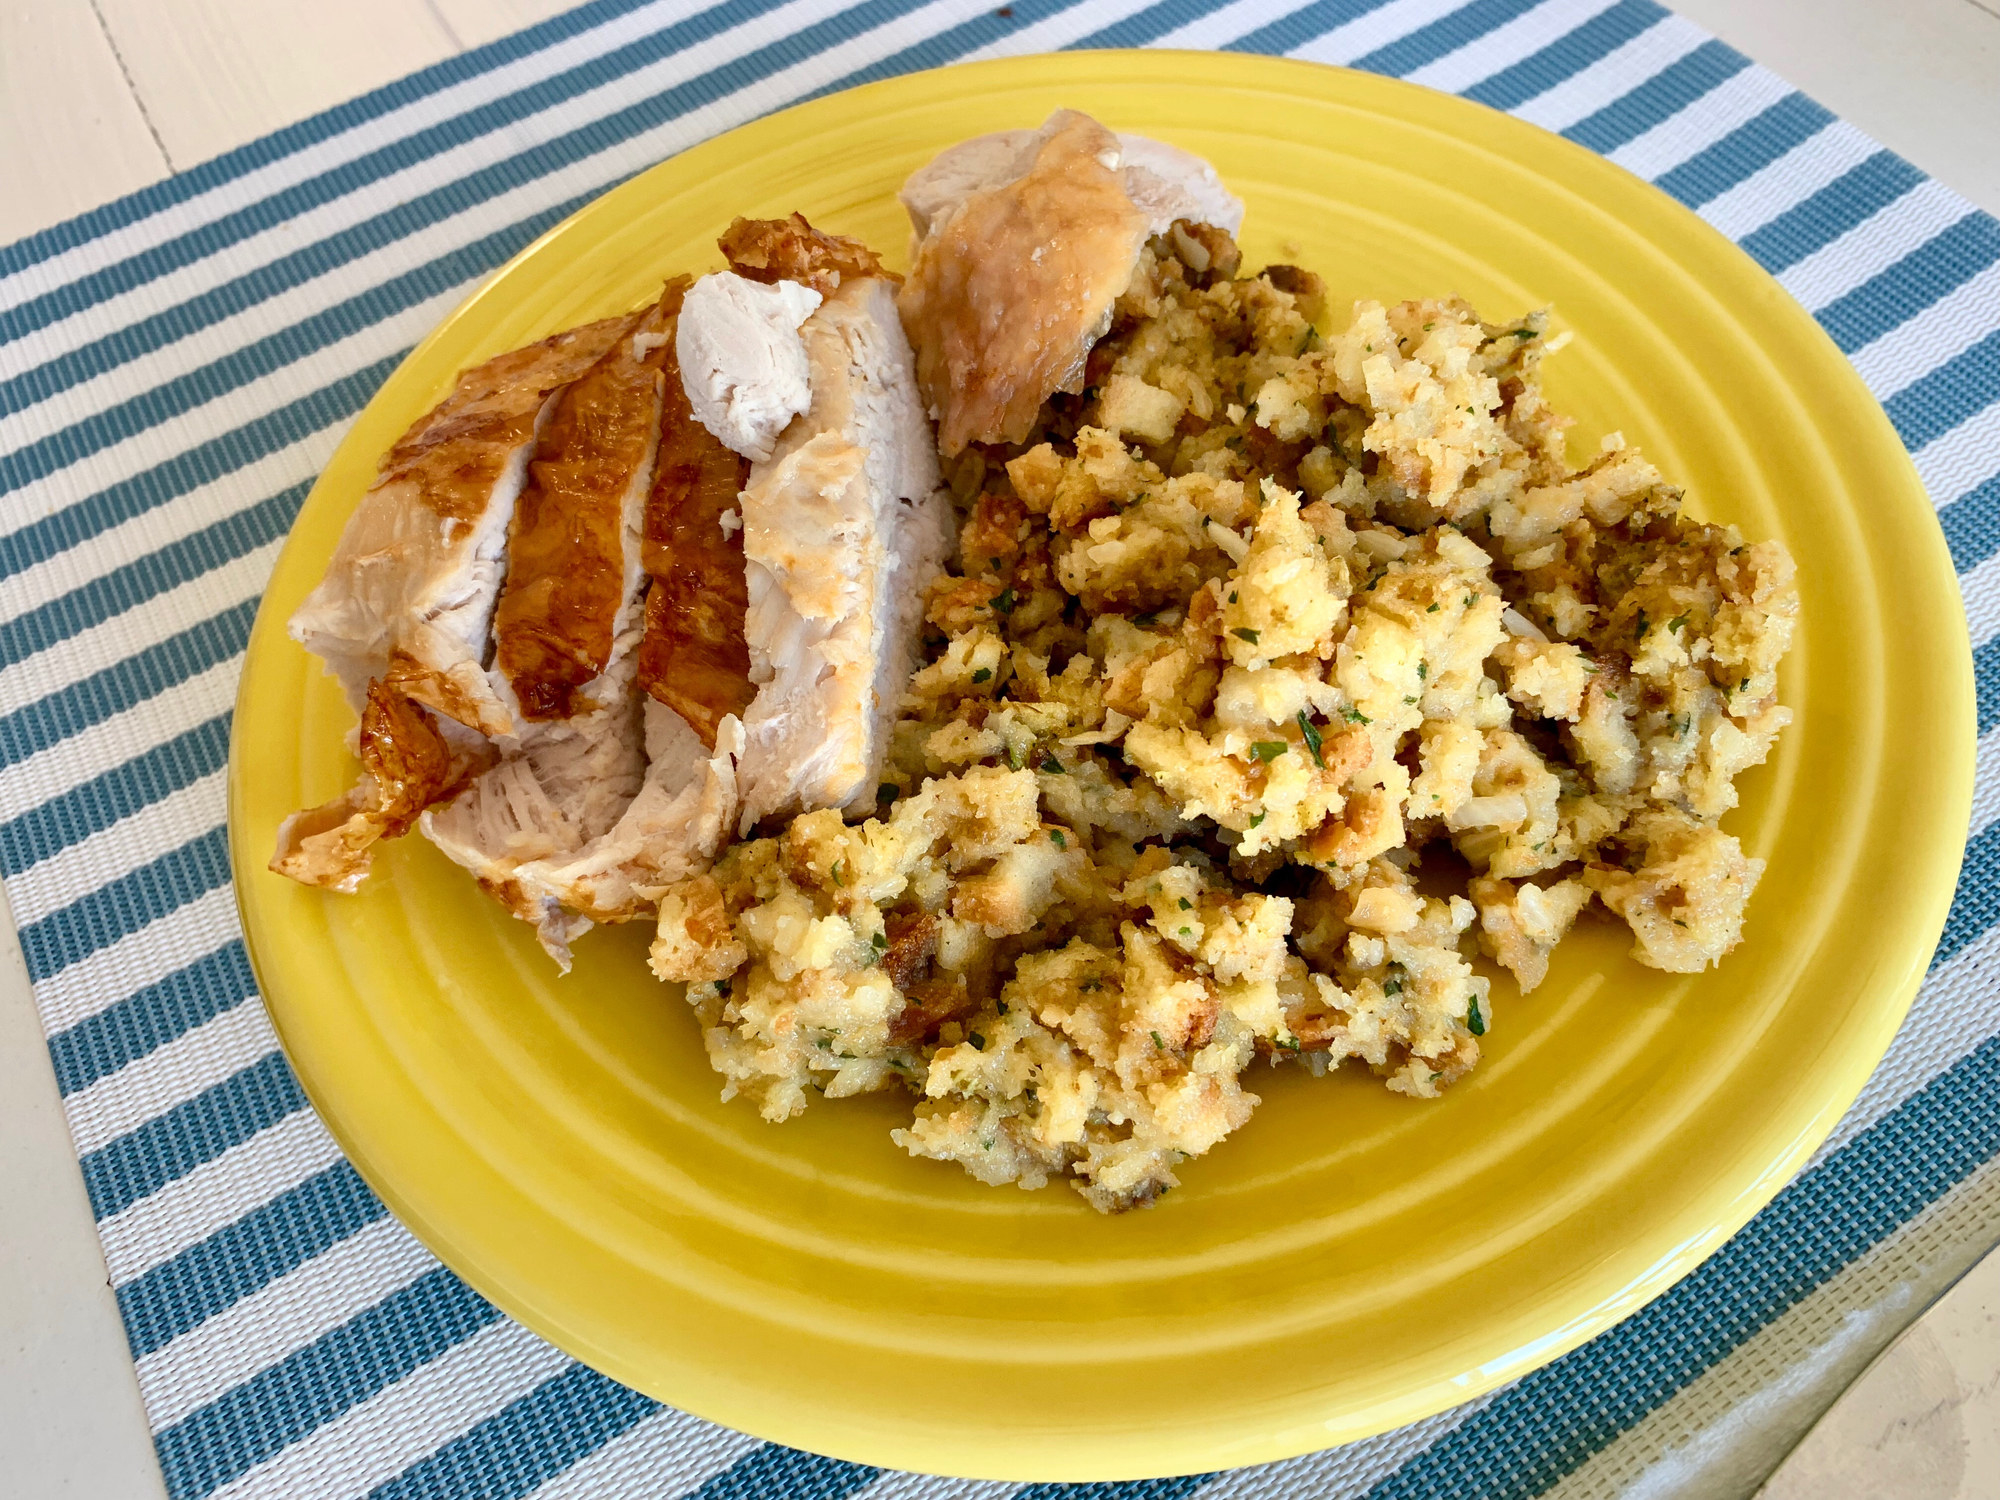 A plate of turkey breast and stuffing